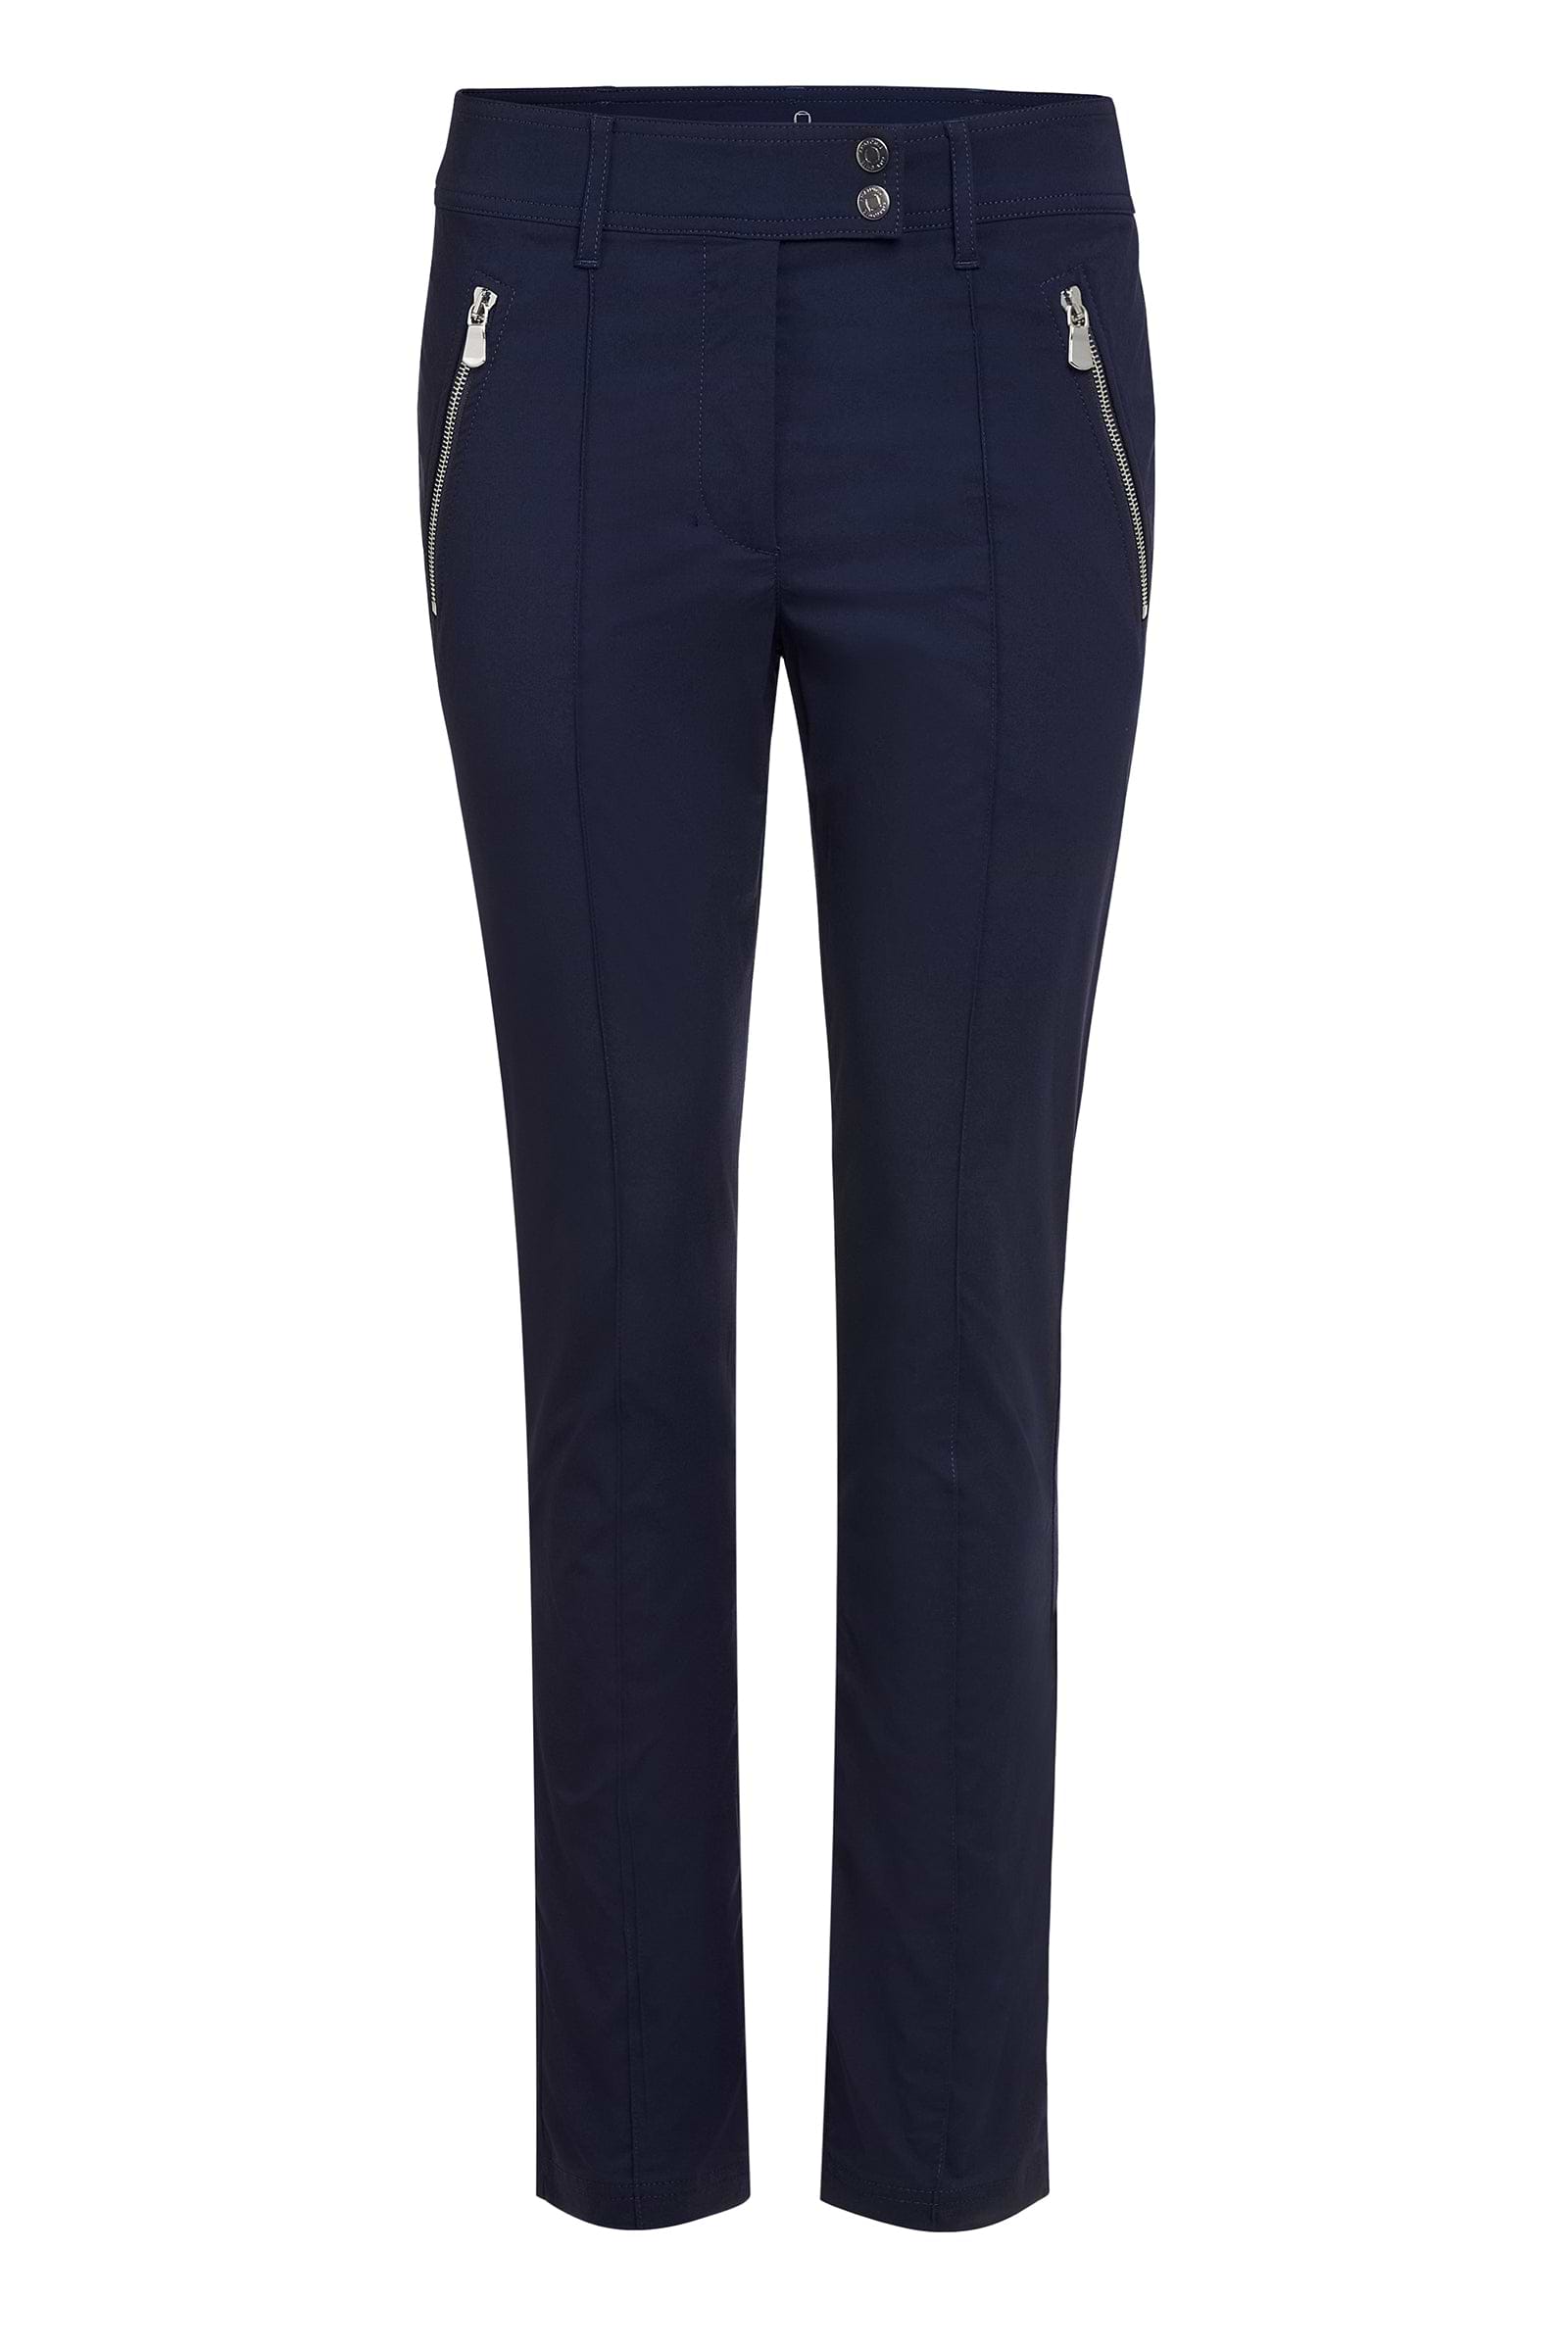 The Best Travel Pants. Flat Lay of the Peggy Zippered Pant in Navy